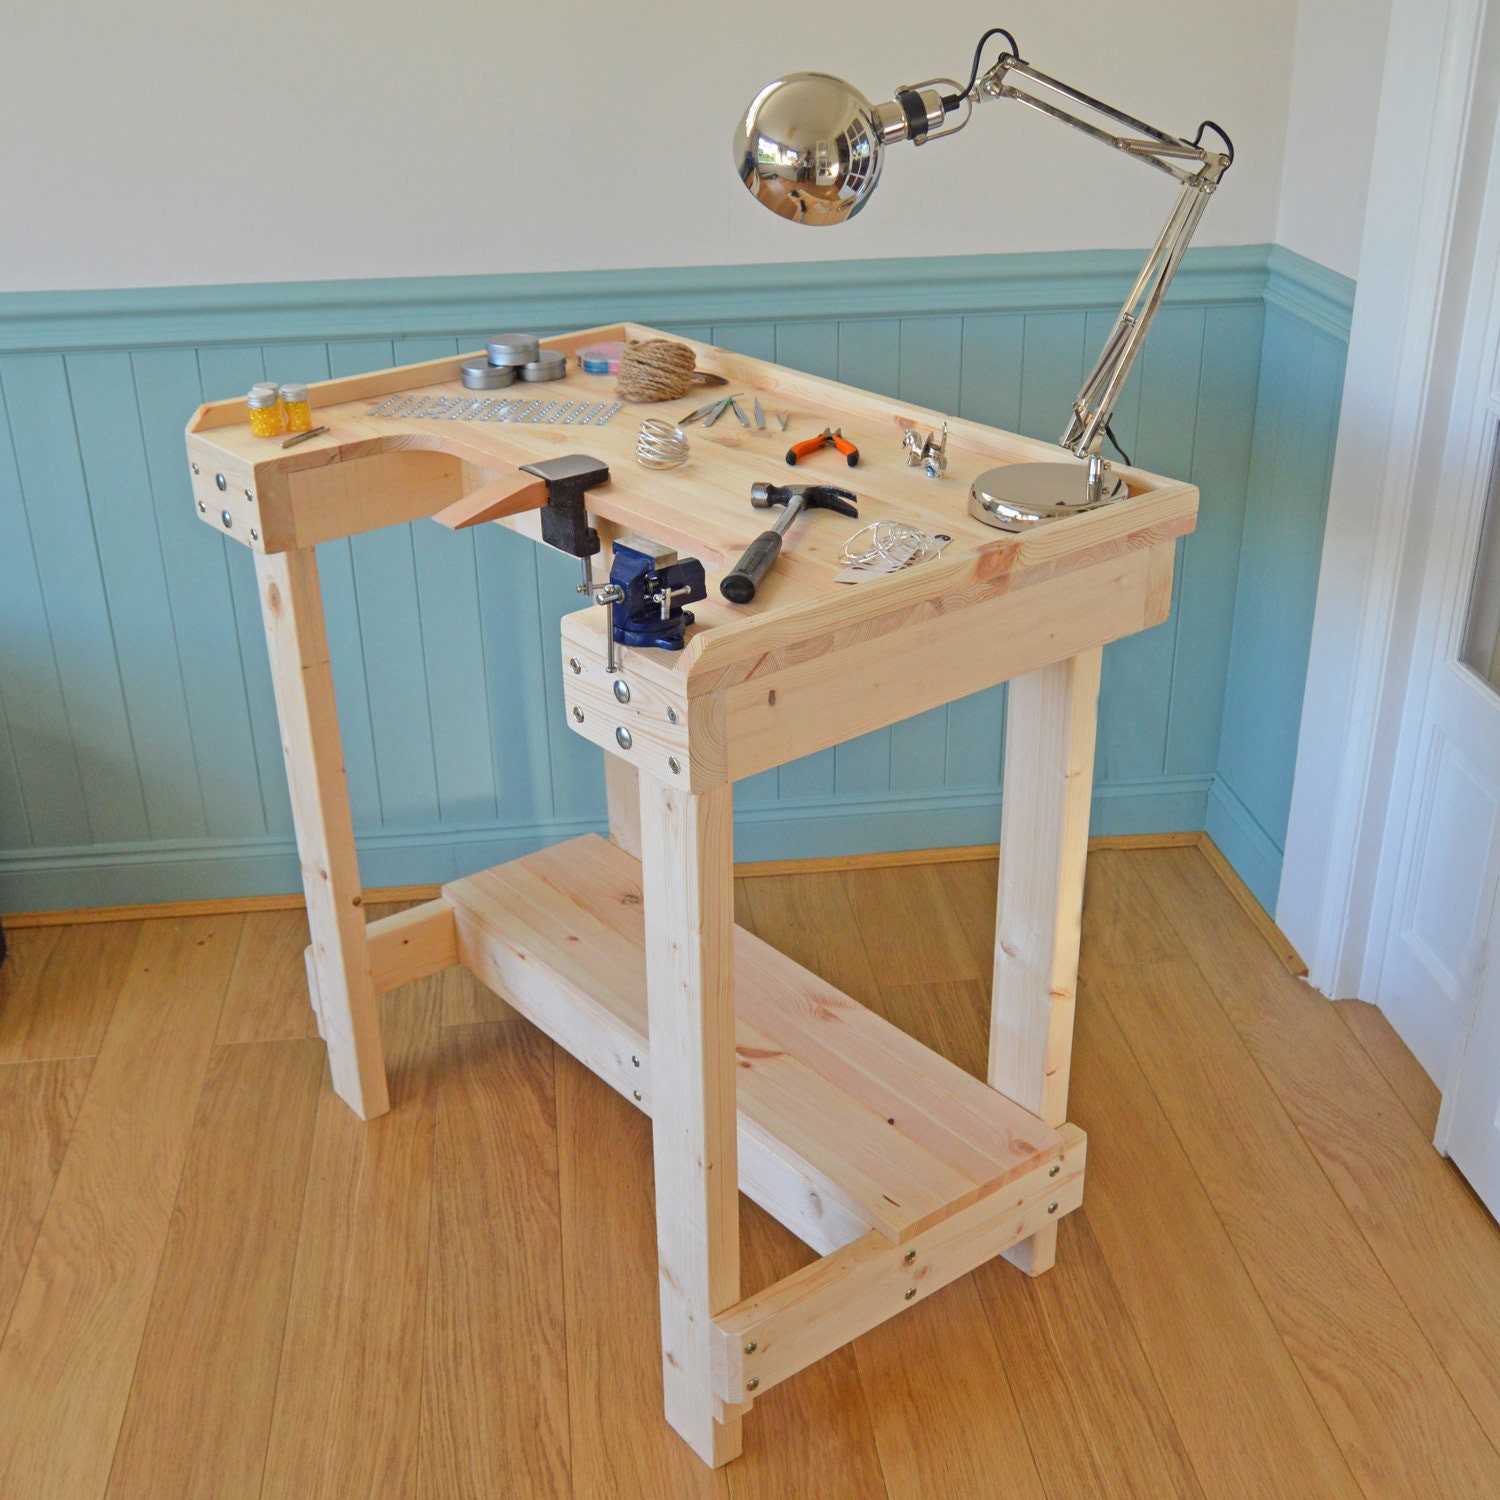 Euro Style Compact Jewelers Bench